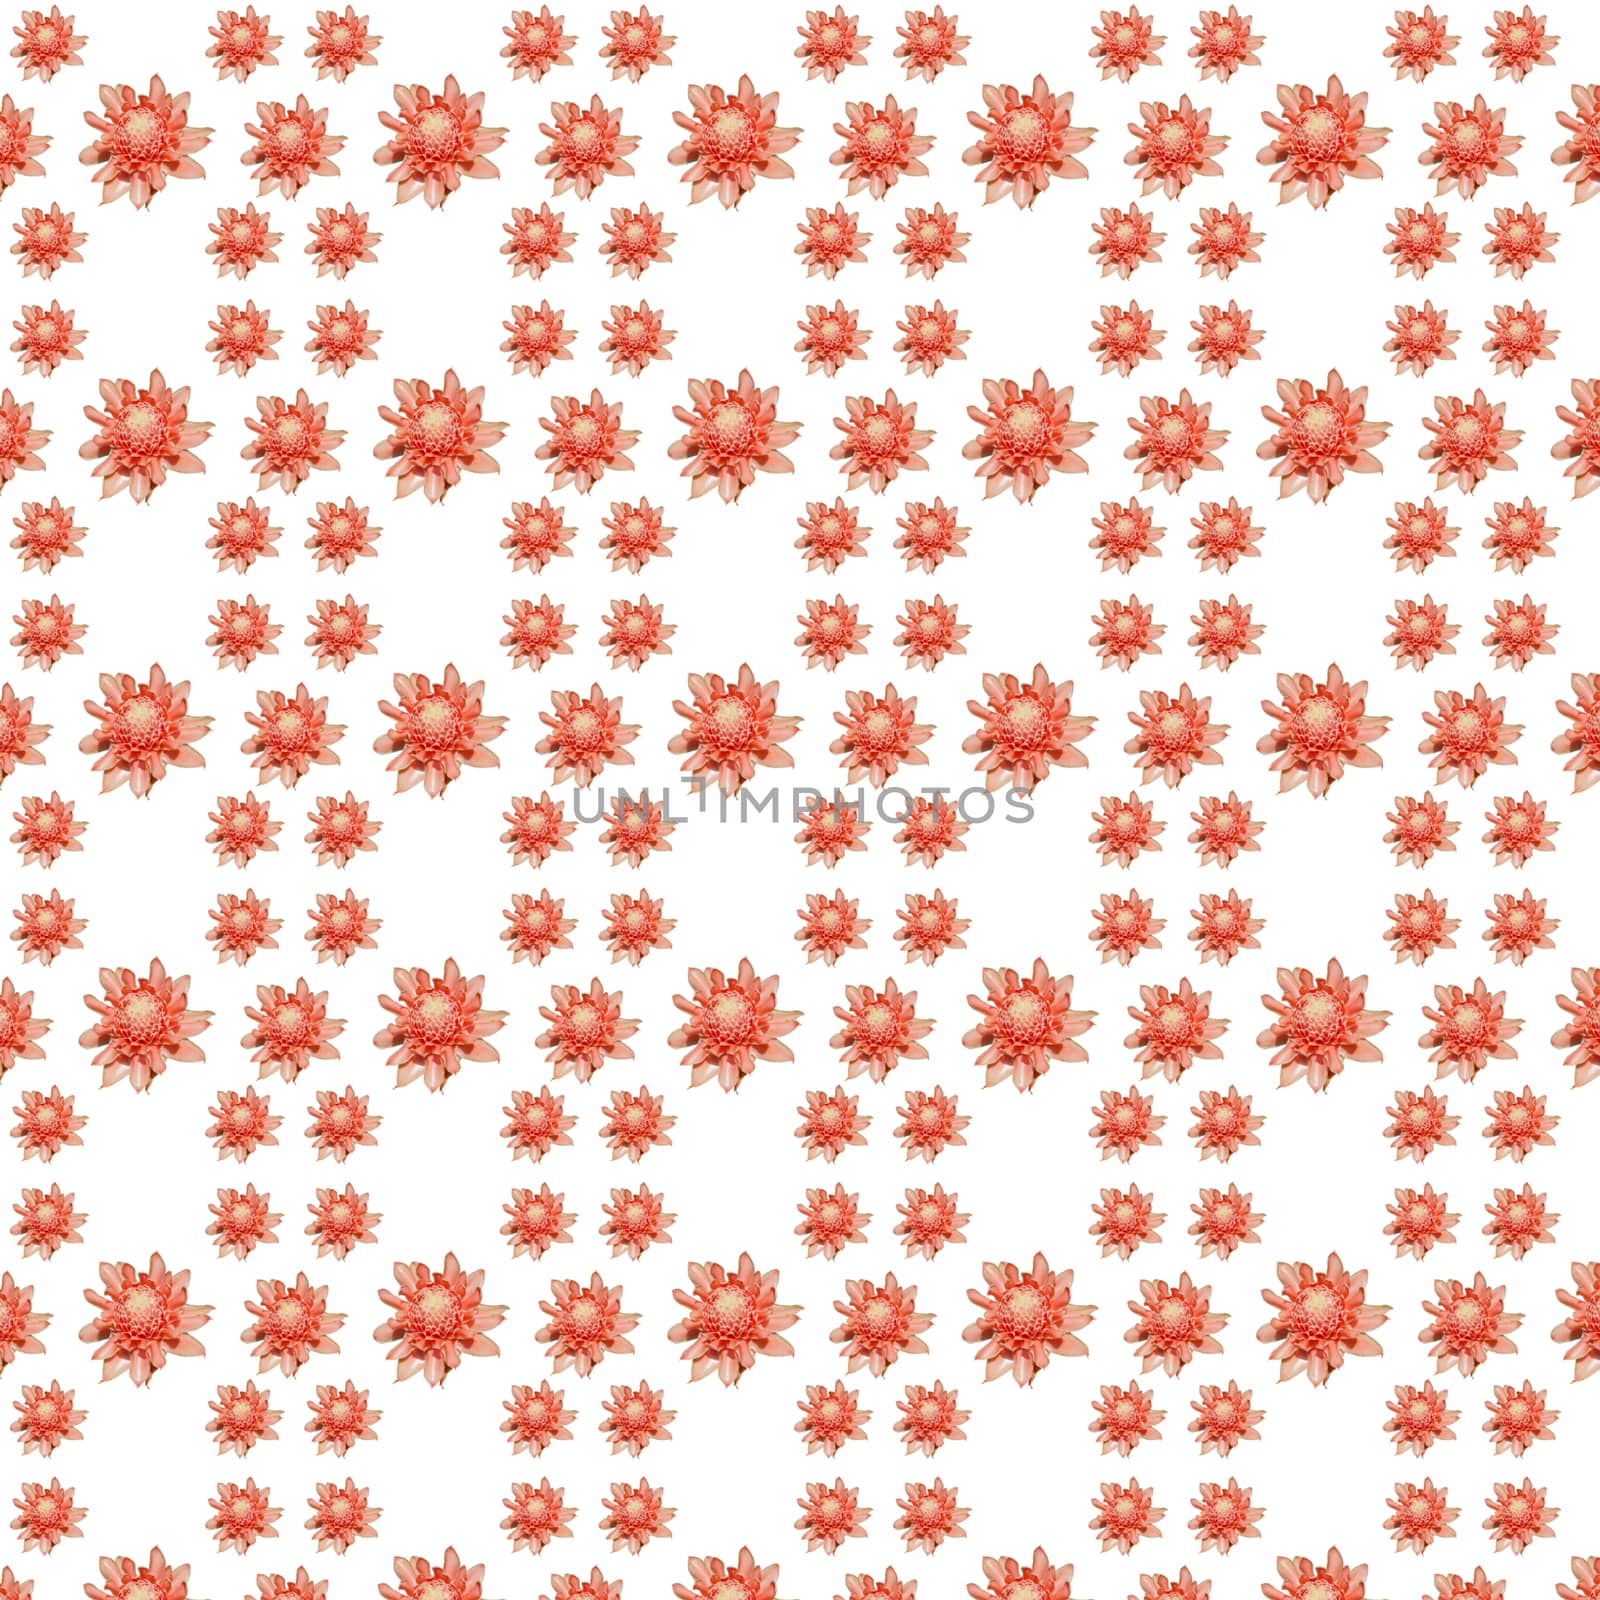 Seamless pattern of pink flower on white background.
Plants seamless pattern concept.